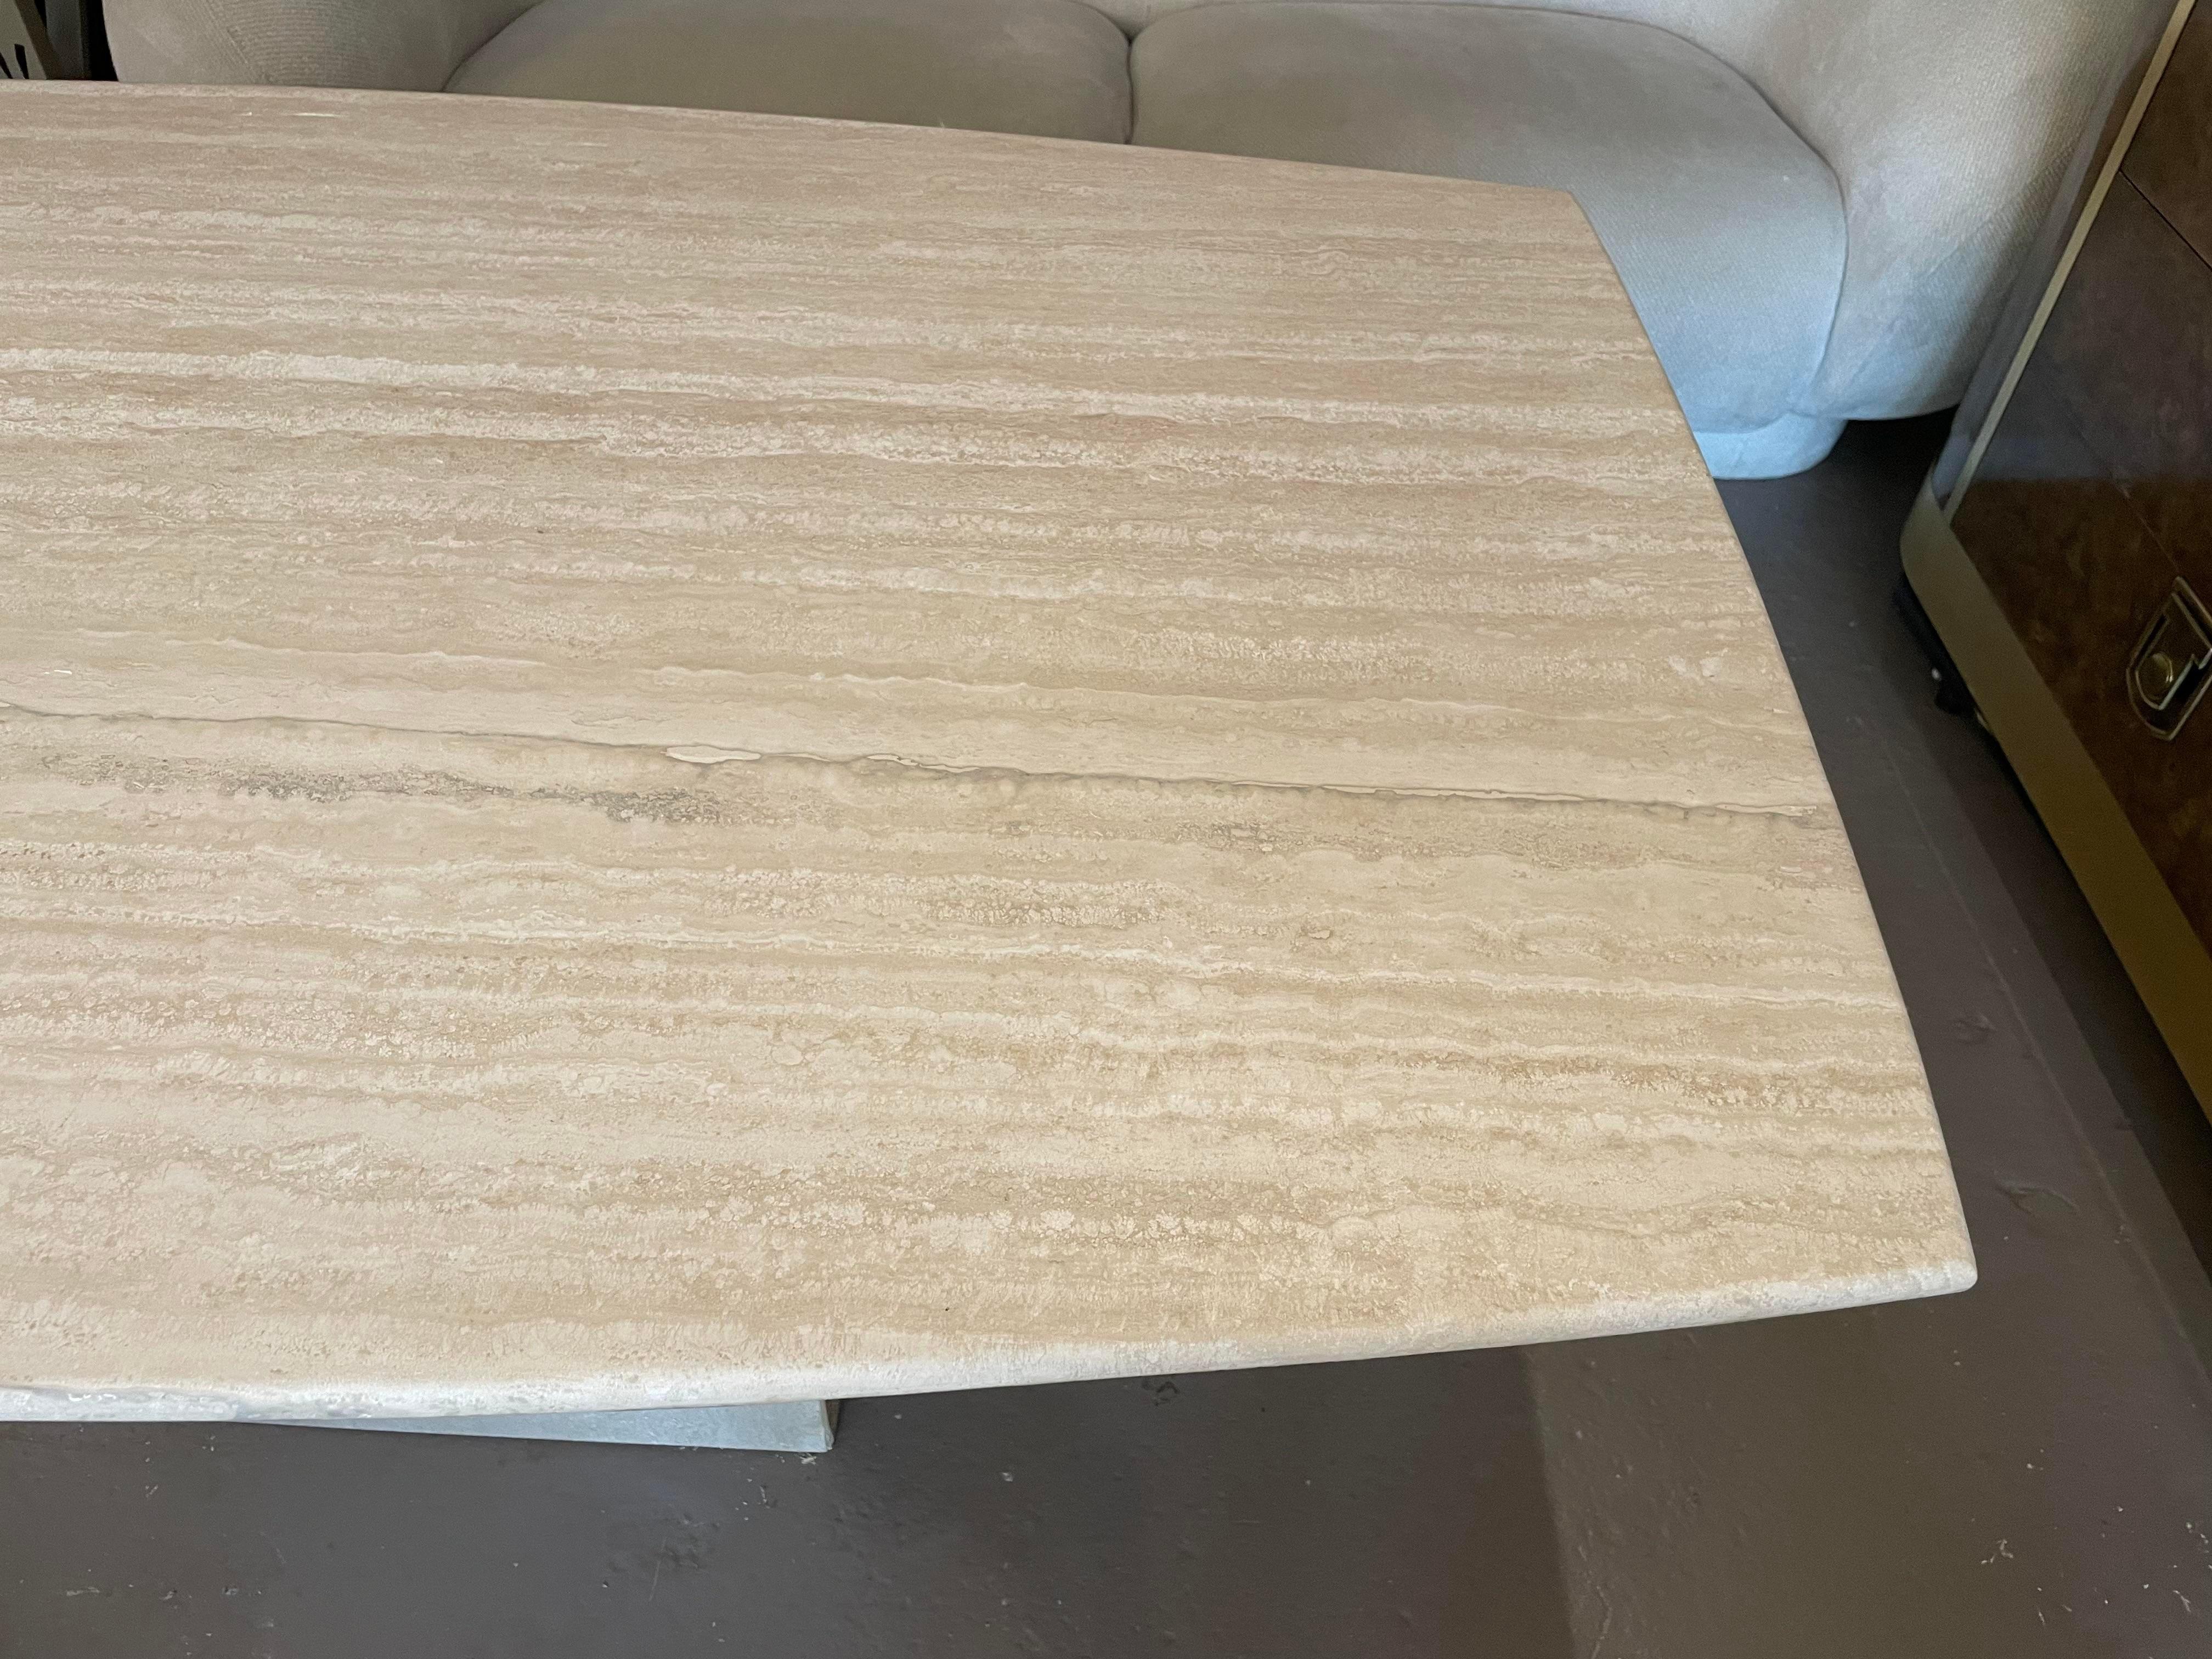 Really stunning dining table. I love the veining - which is really what makes a natural table unlike any other. The table was previously lacquered which was professionally removed and now has an organic honed finish. Ready to go!!